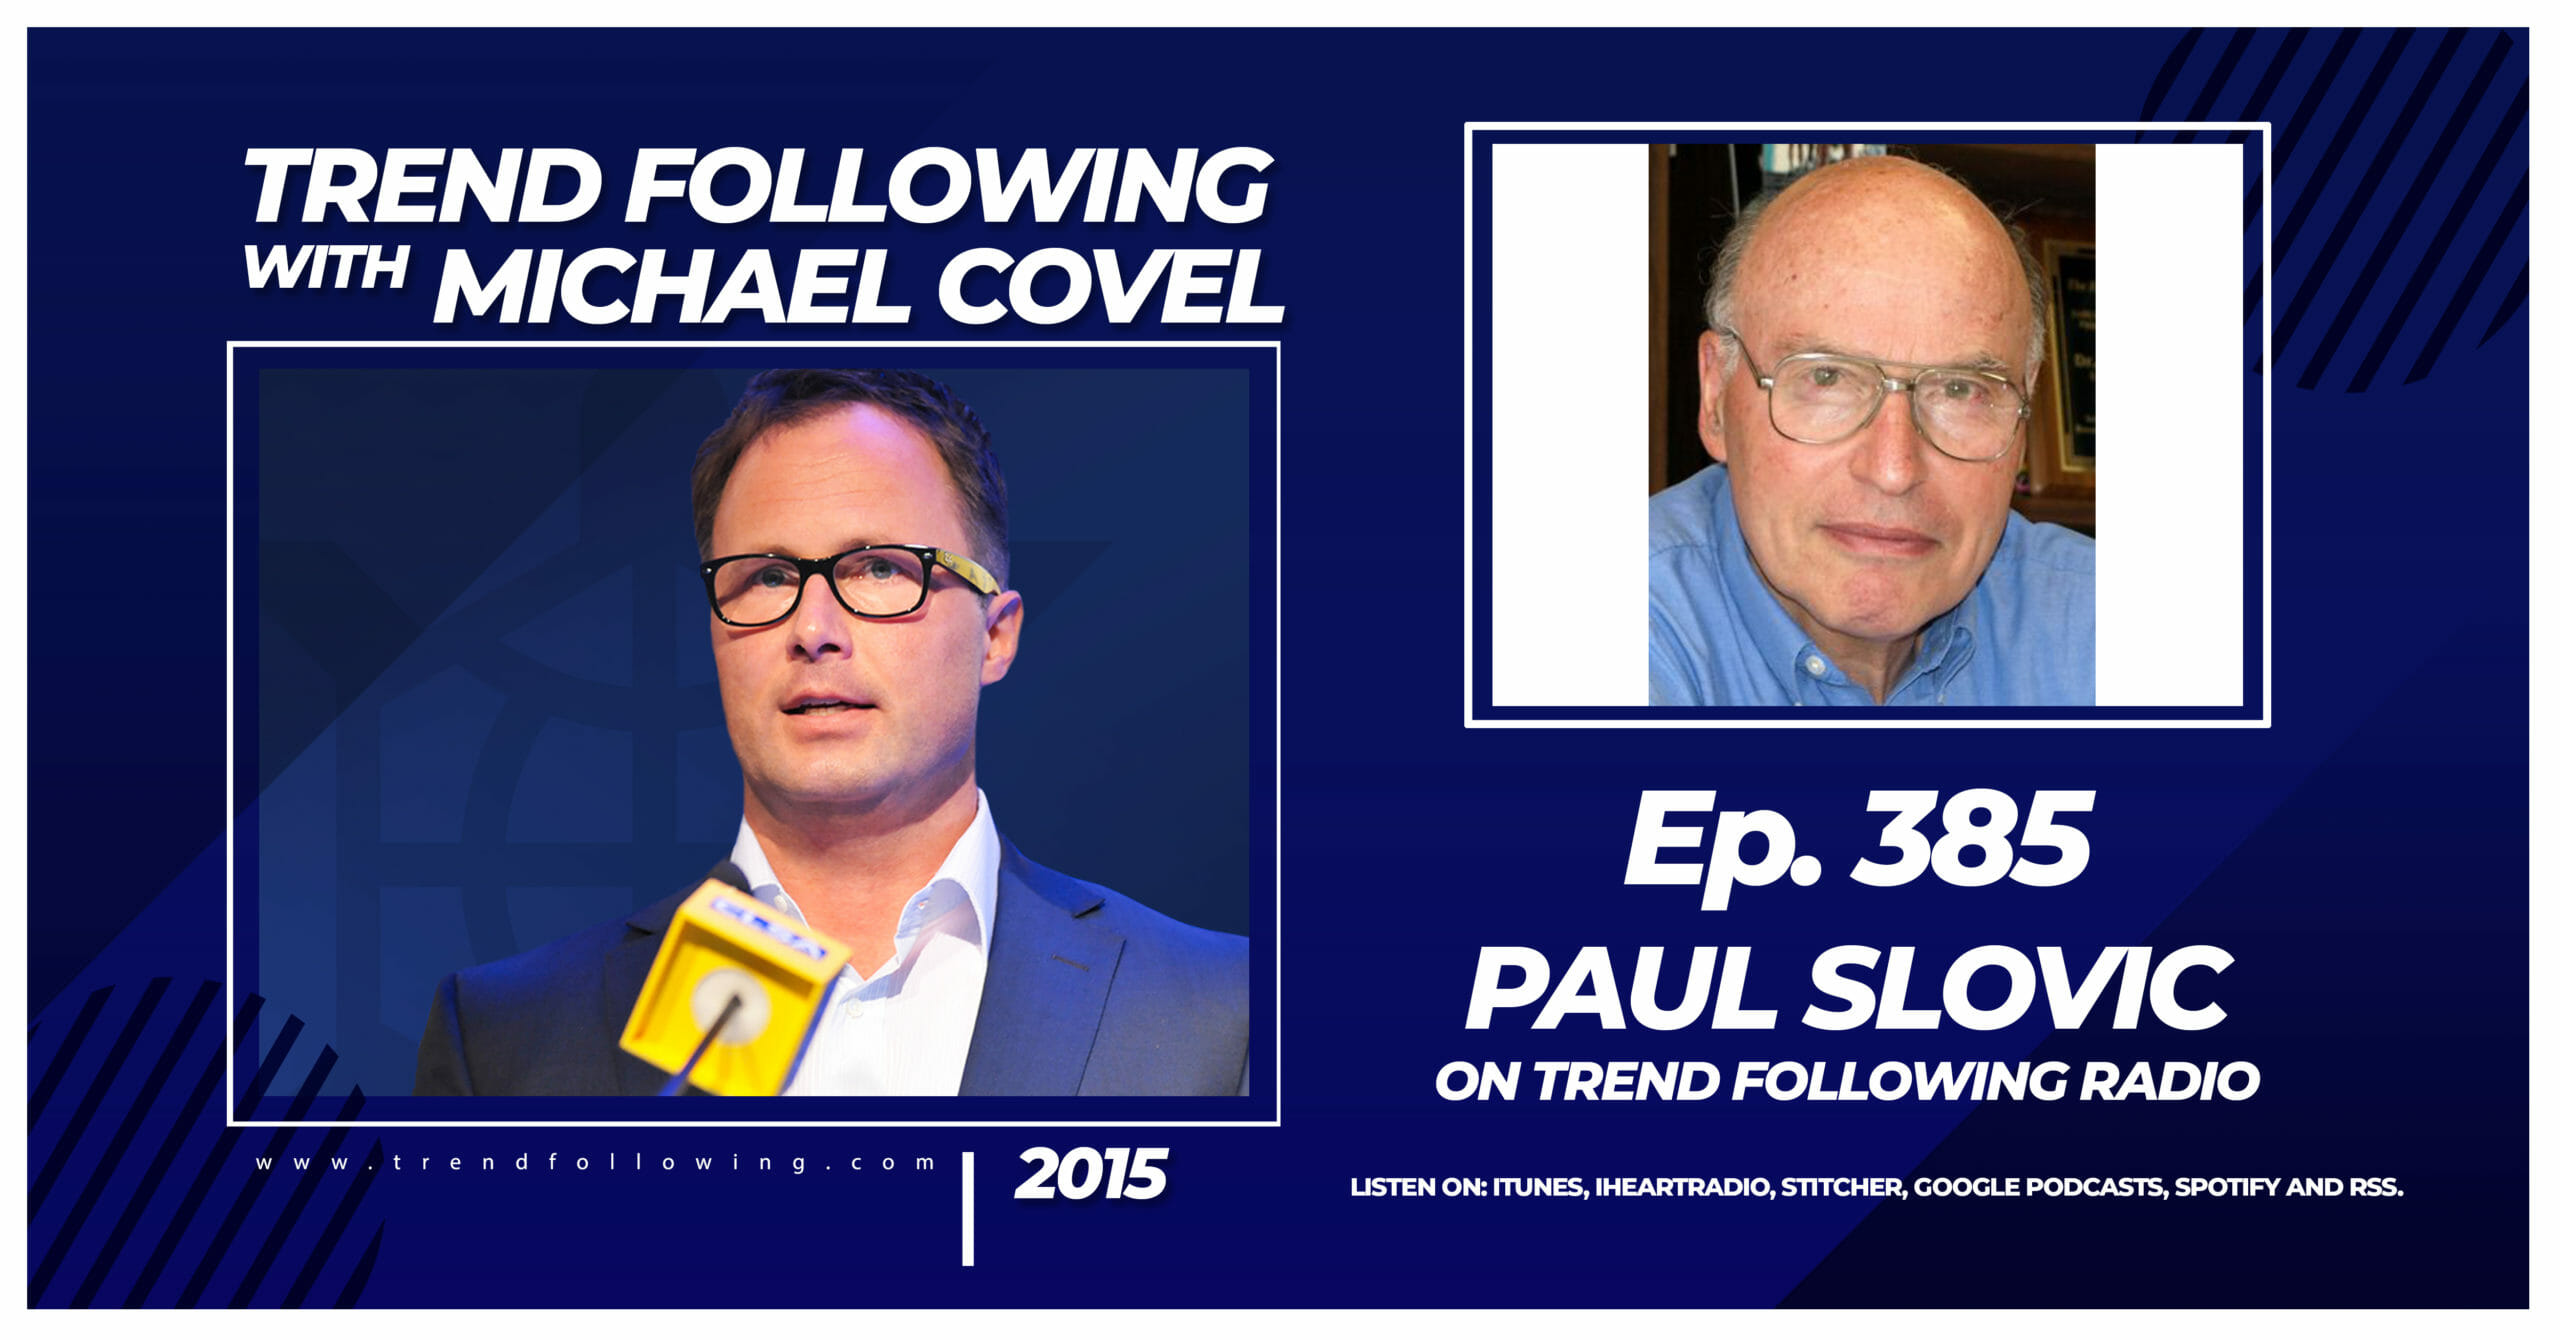 Paul Slovic Interview with Michael Covel on Trend Following Radio